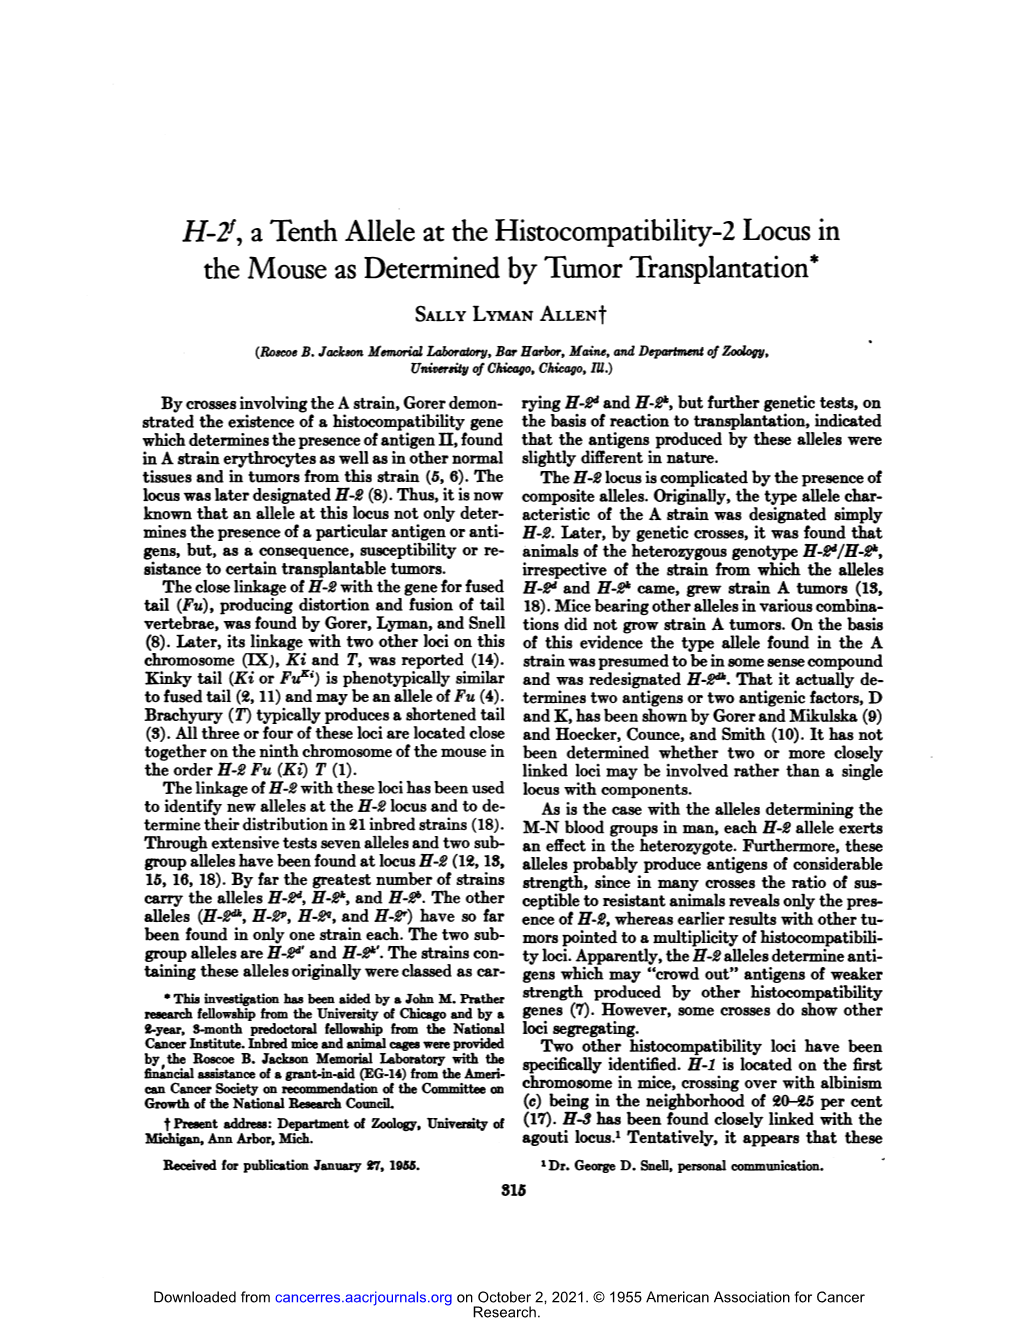 H-I, Atenth Allele at the Histocompatibility-2 Locus In